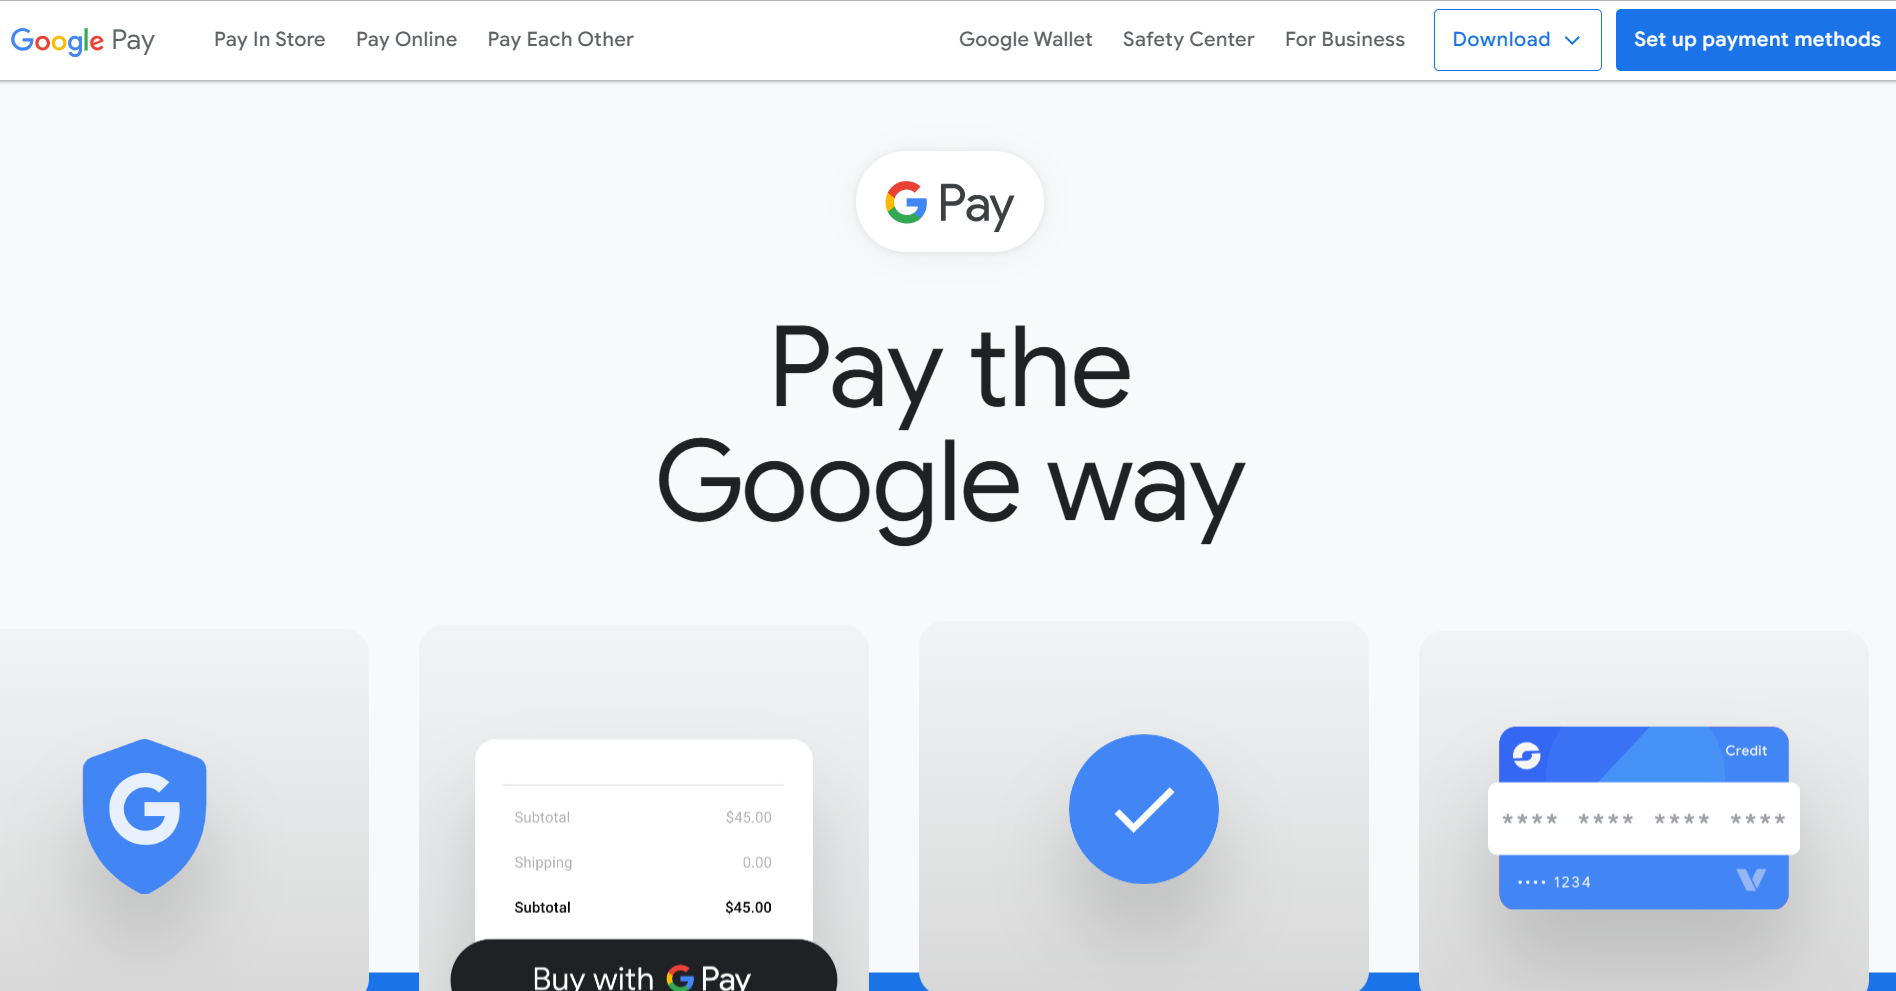 What is Google Pay